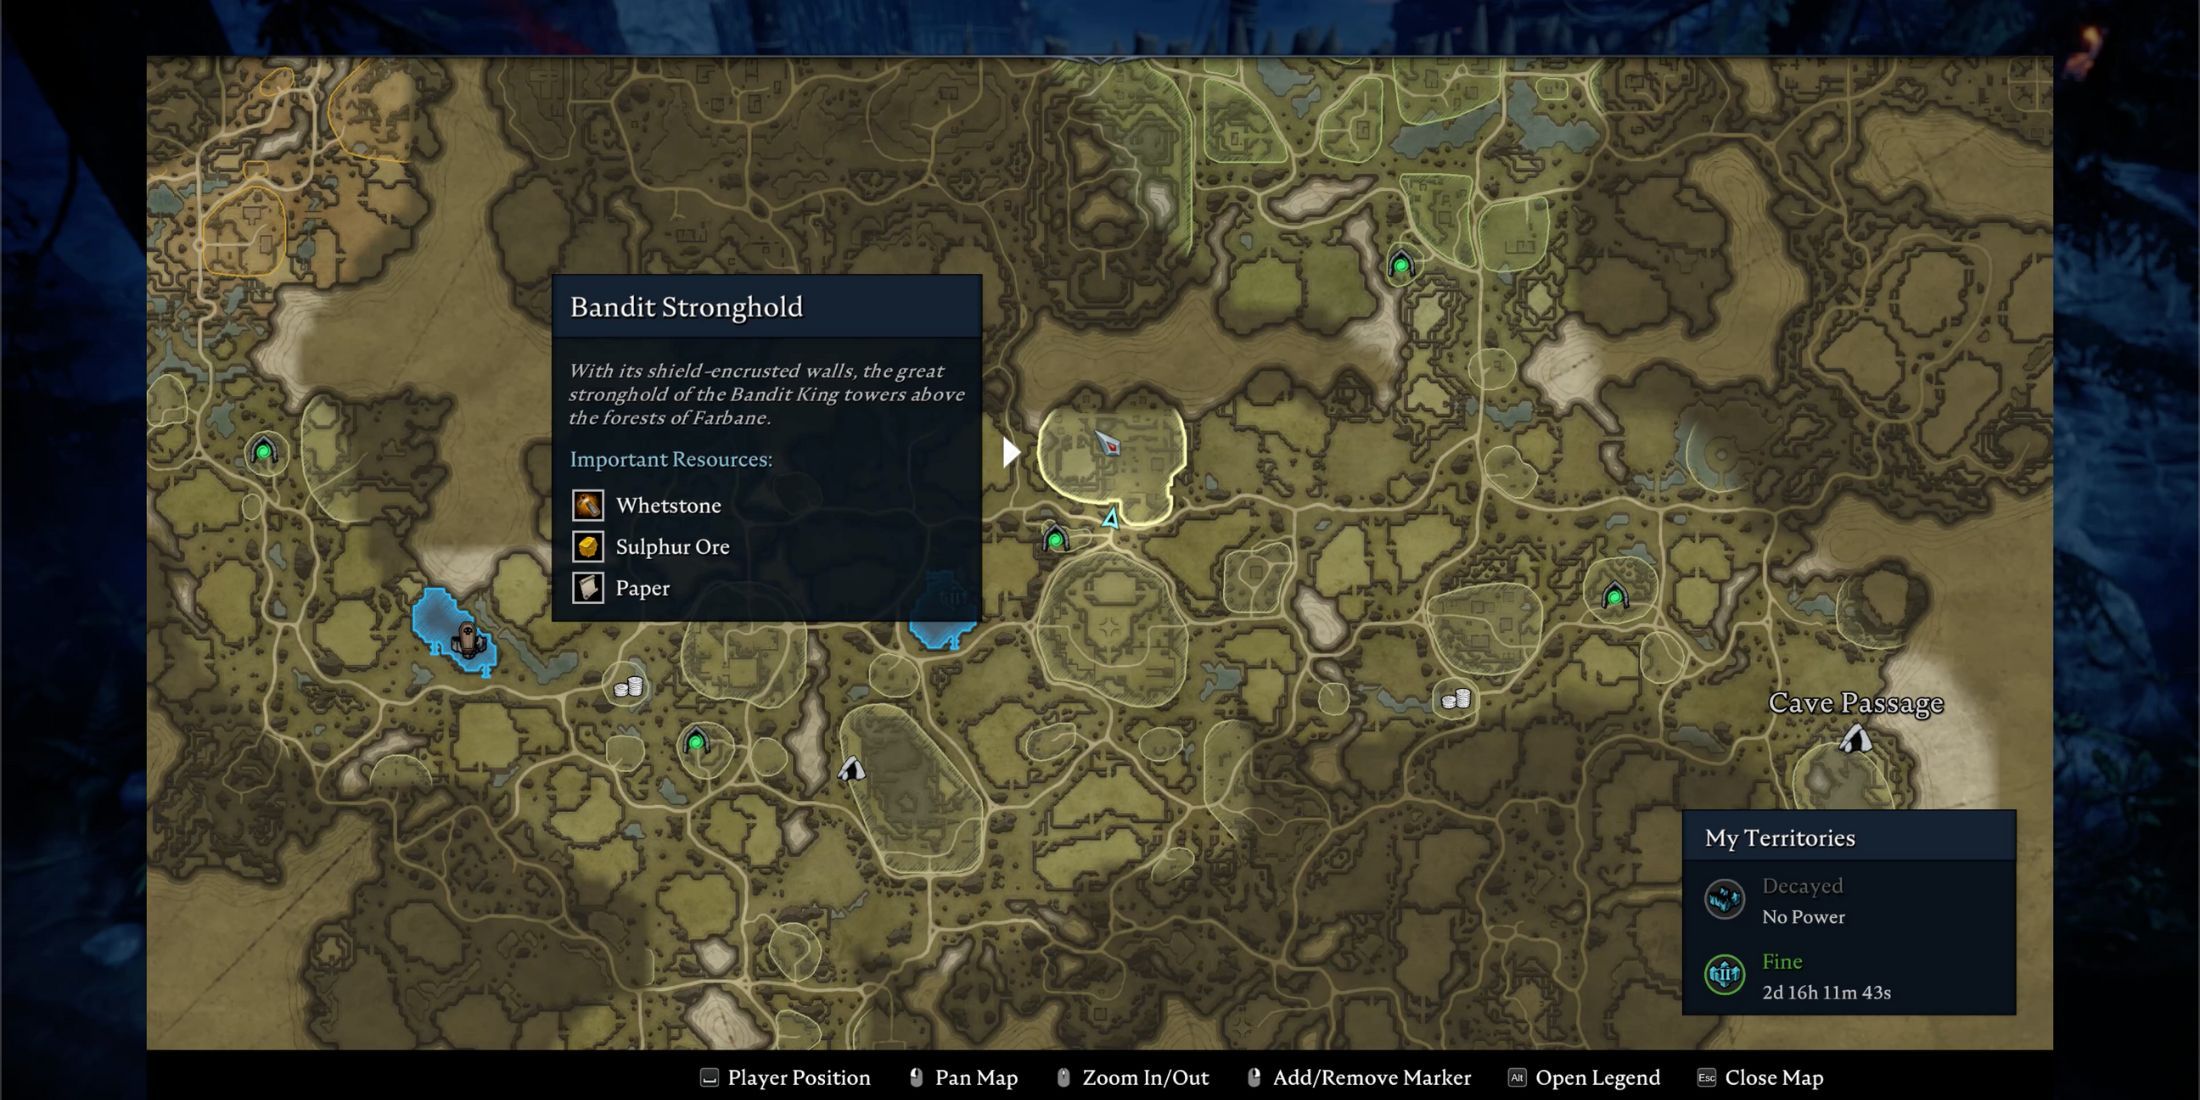 Quincey the Bandit King location on the map in V Rising